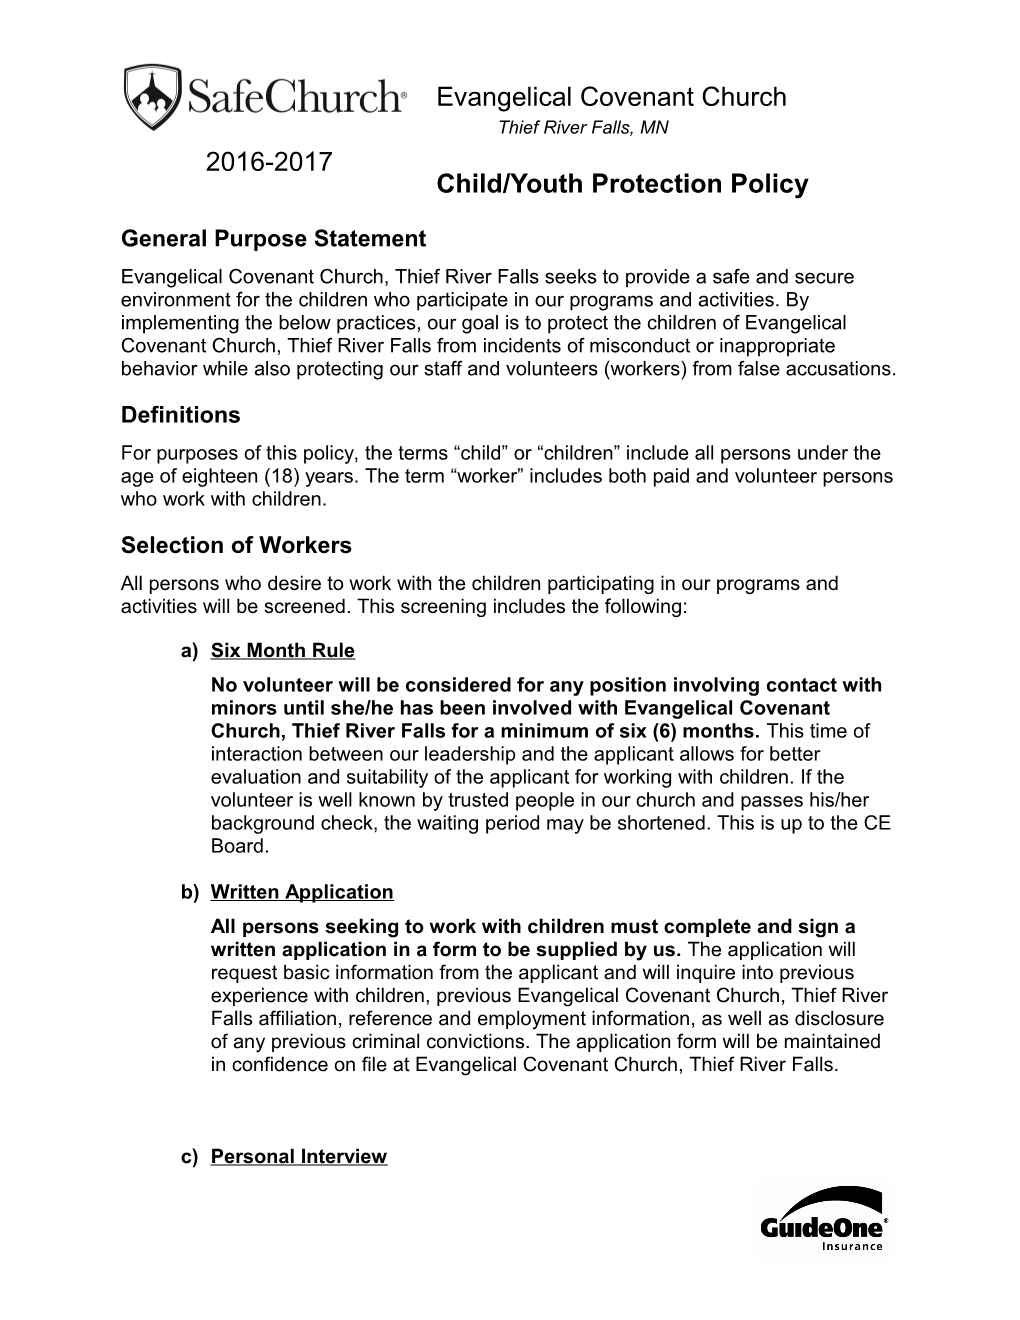 Child Protection Policy Sample (Customizable)